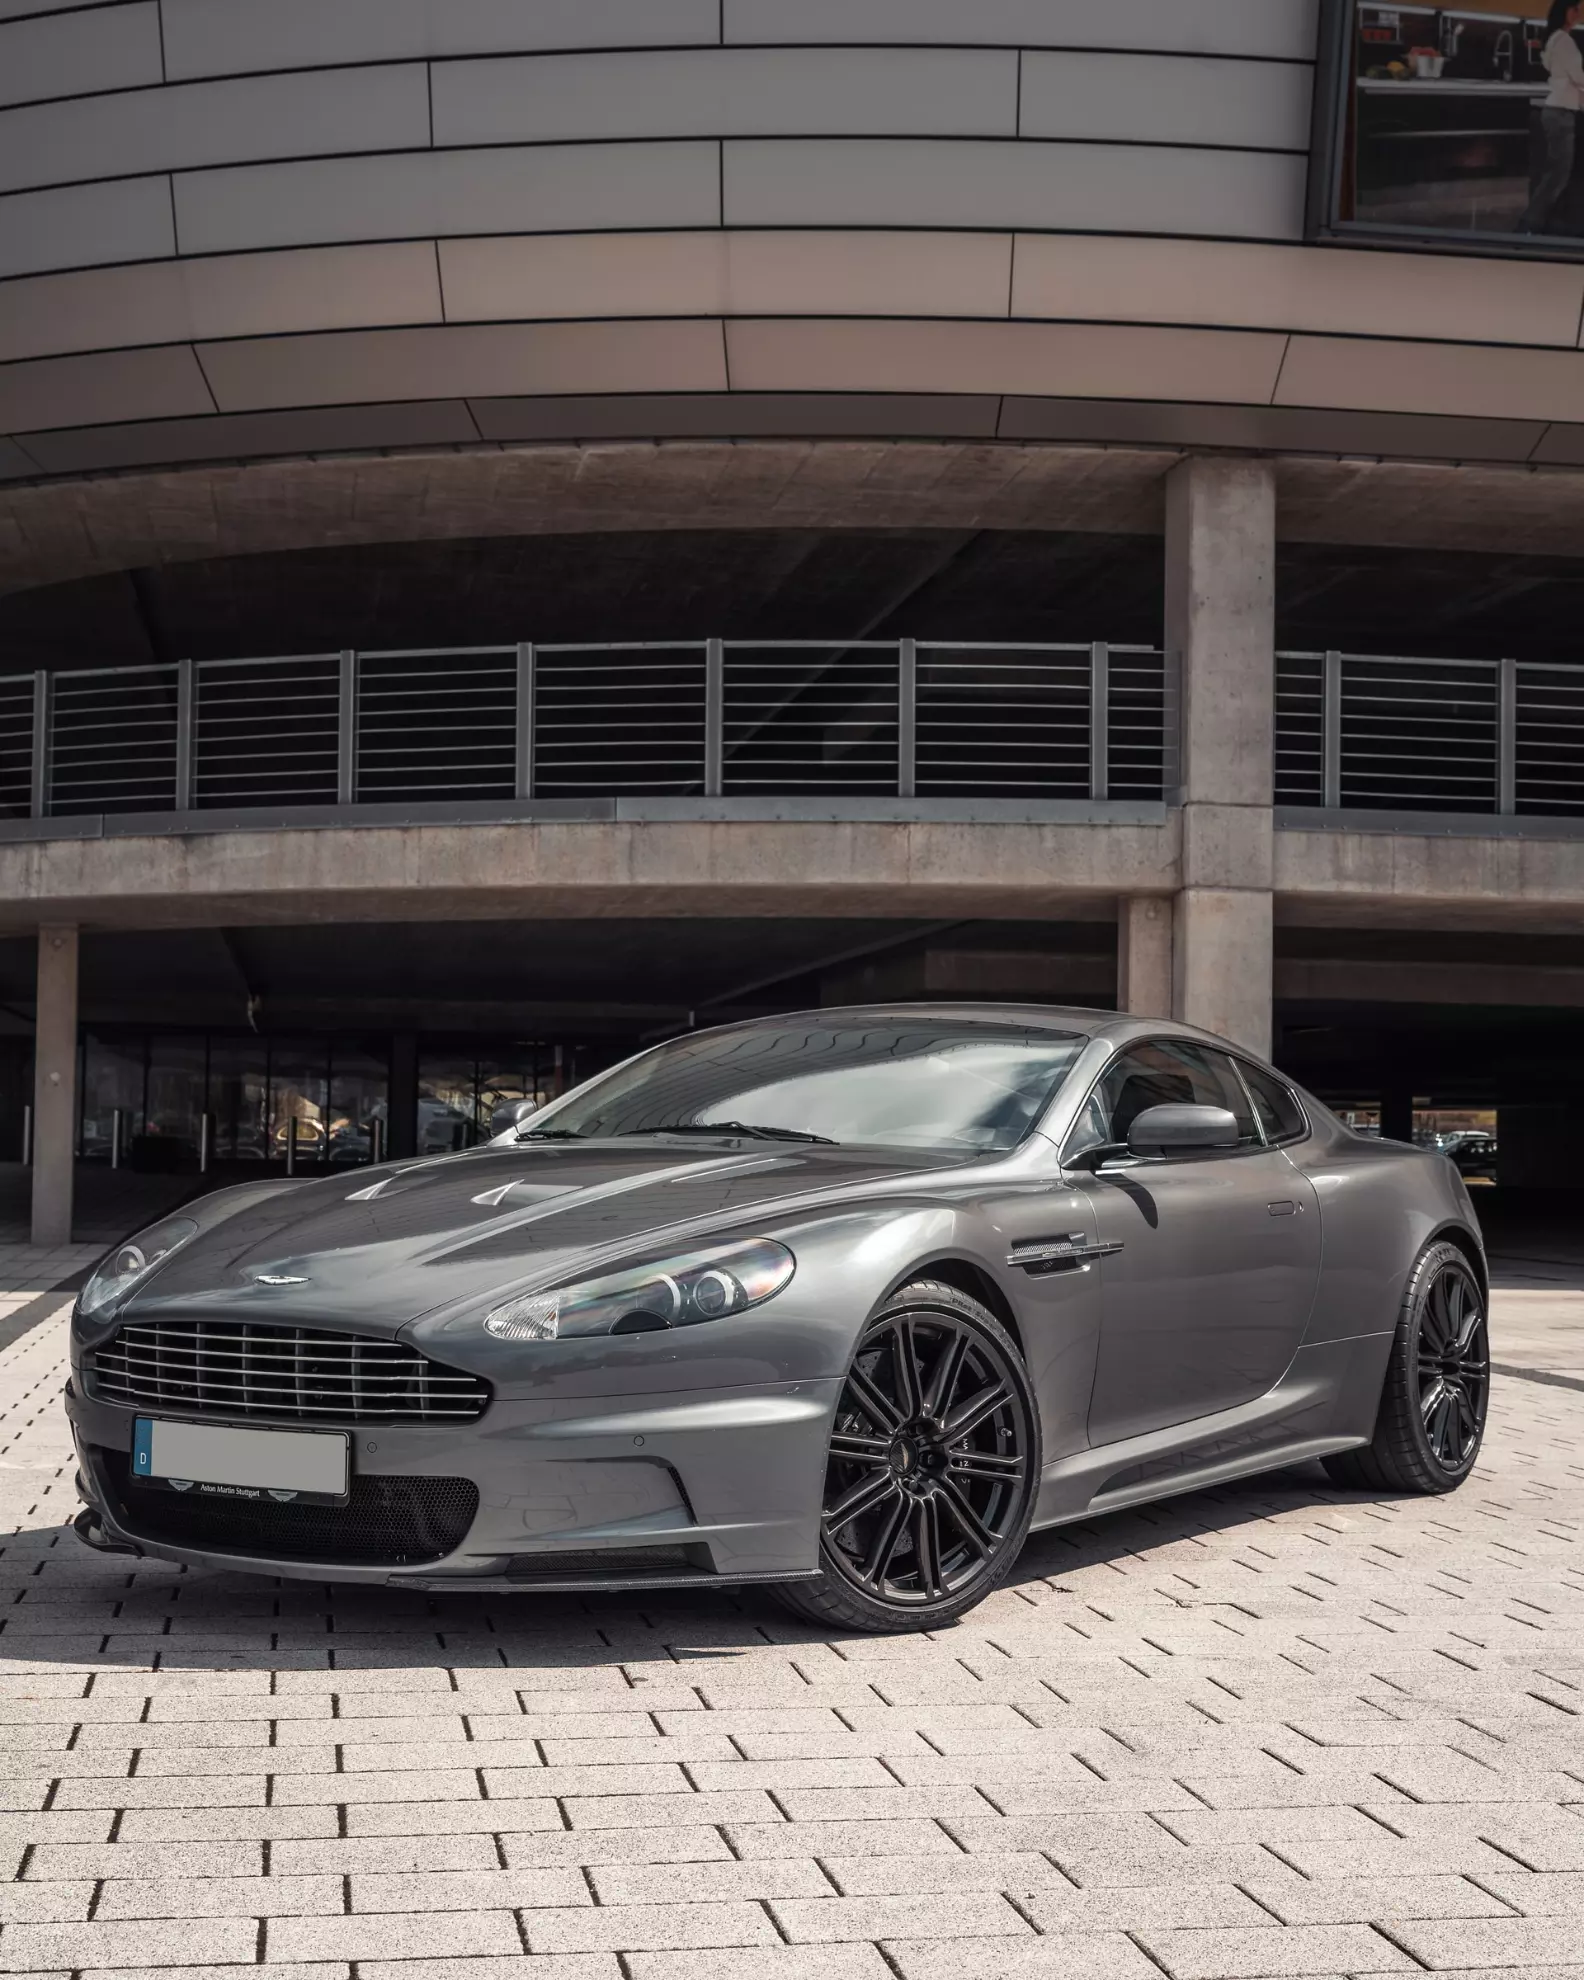 Aston Martin Rapide: What are the best-used luxury cars to buy? Hampshire